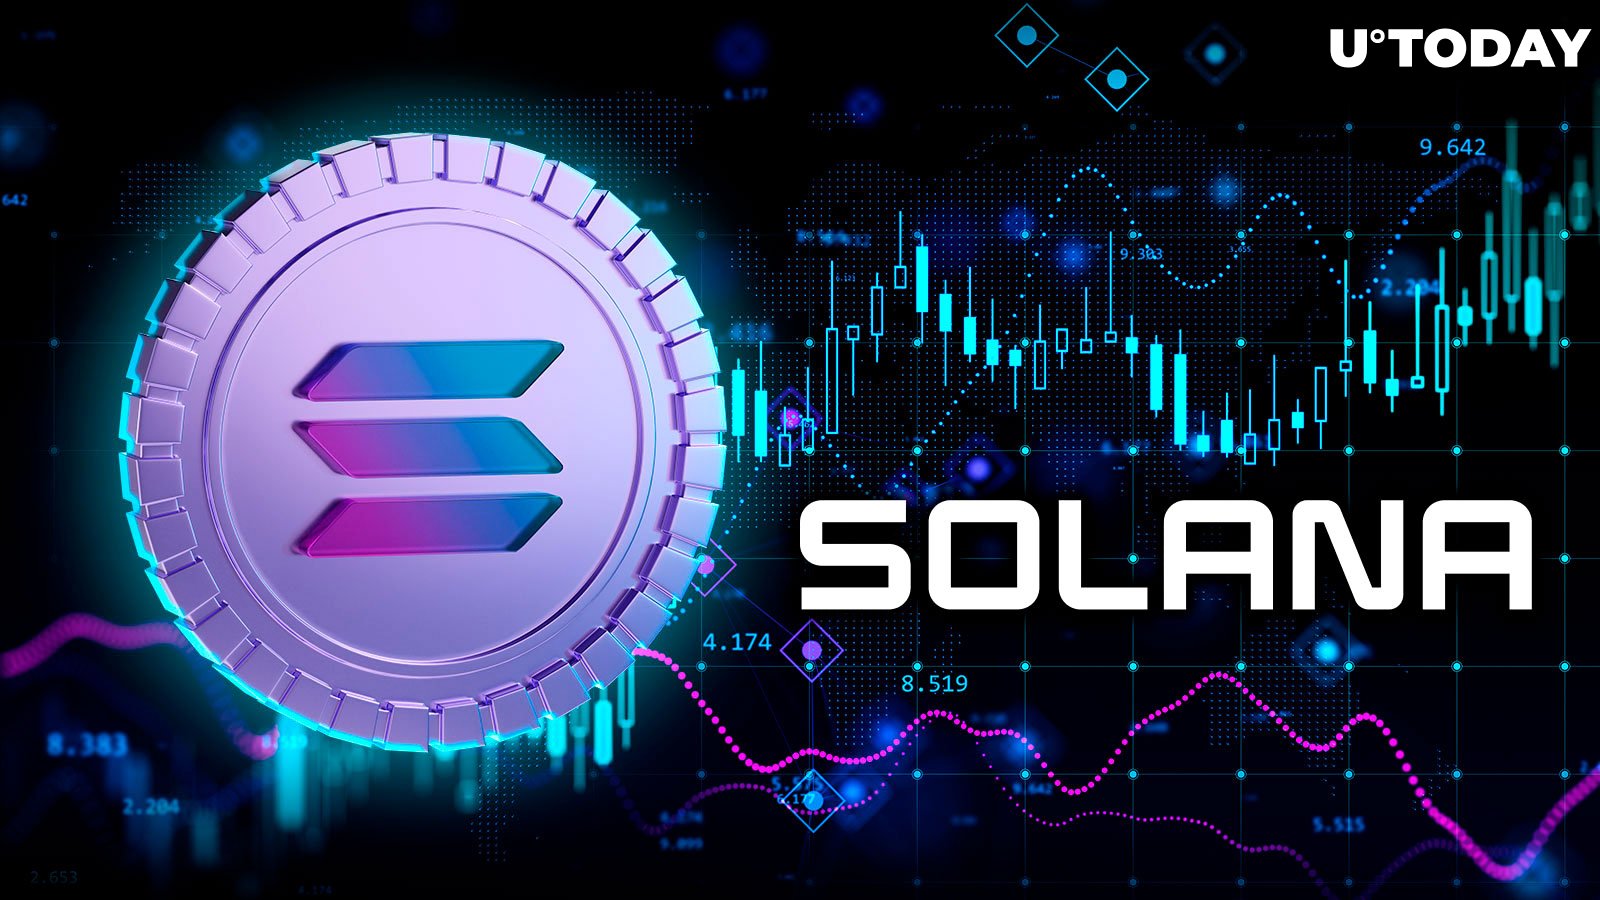 Solana (SOL) Skyrockets 37% in Trading Volume - What's Happening?